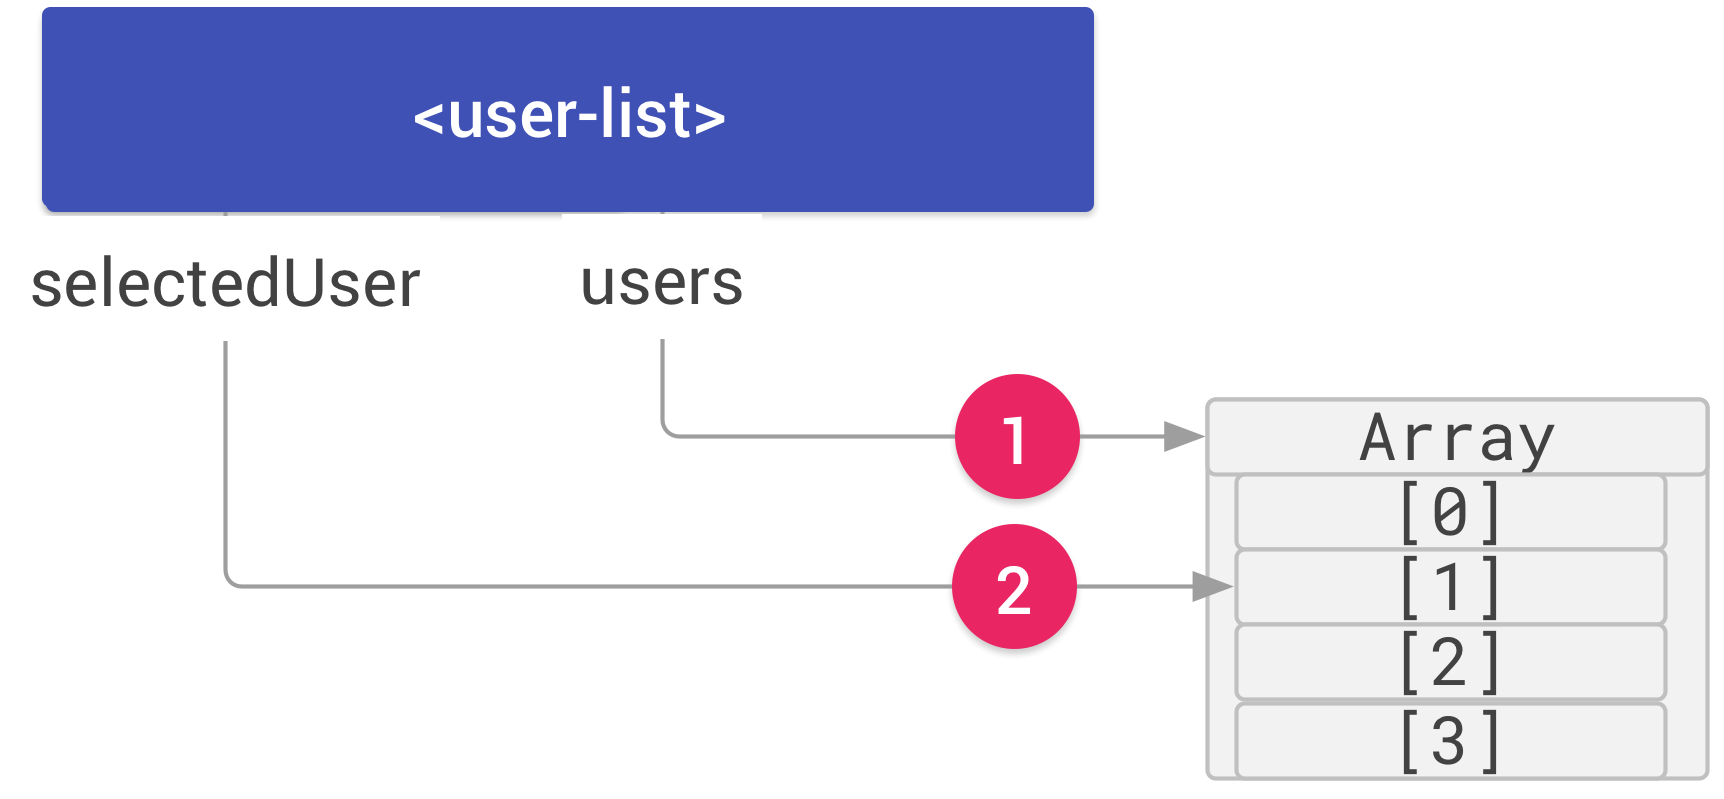 A user-list element and an array with four items labeled [0] through [3]. The user-list has two properties, users and selectedUser. The users property is connected to the array by an arrow labeled 1. The selectedUser property is connected to the array item, [1] by an arrow labeled 2.